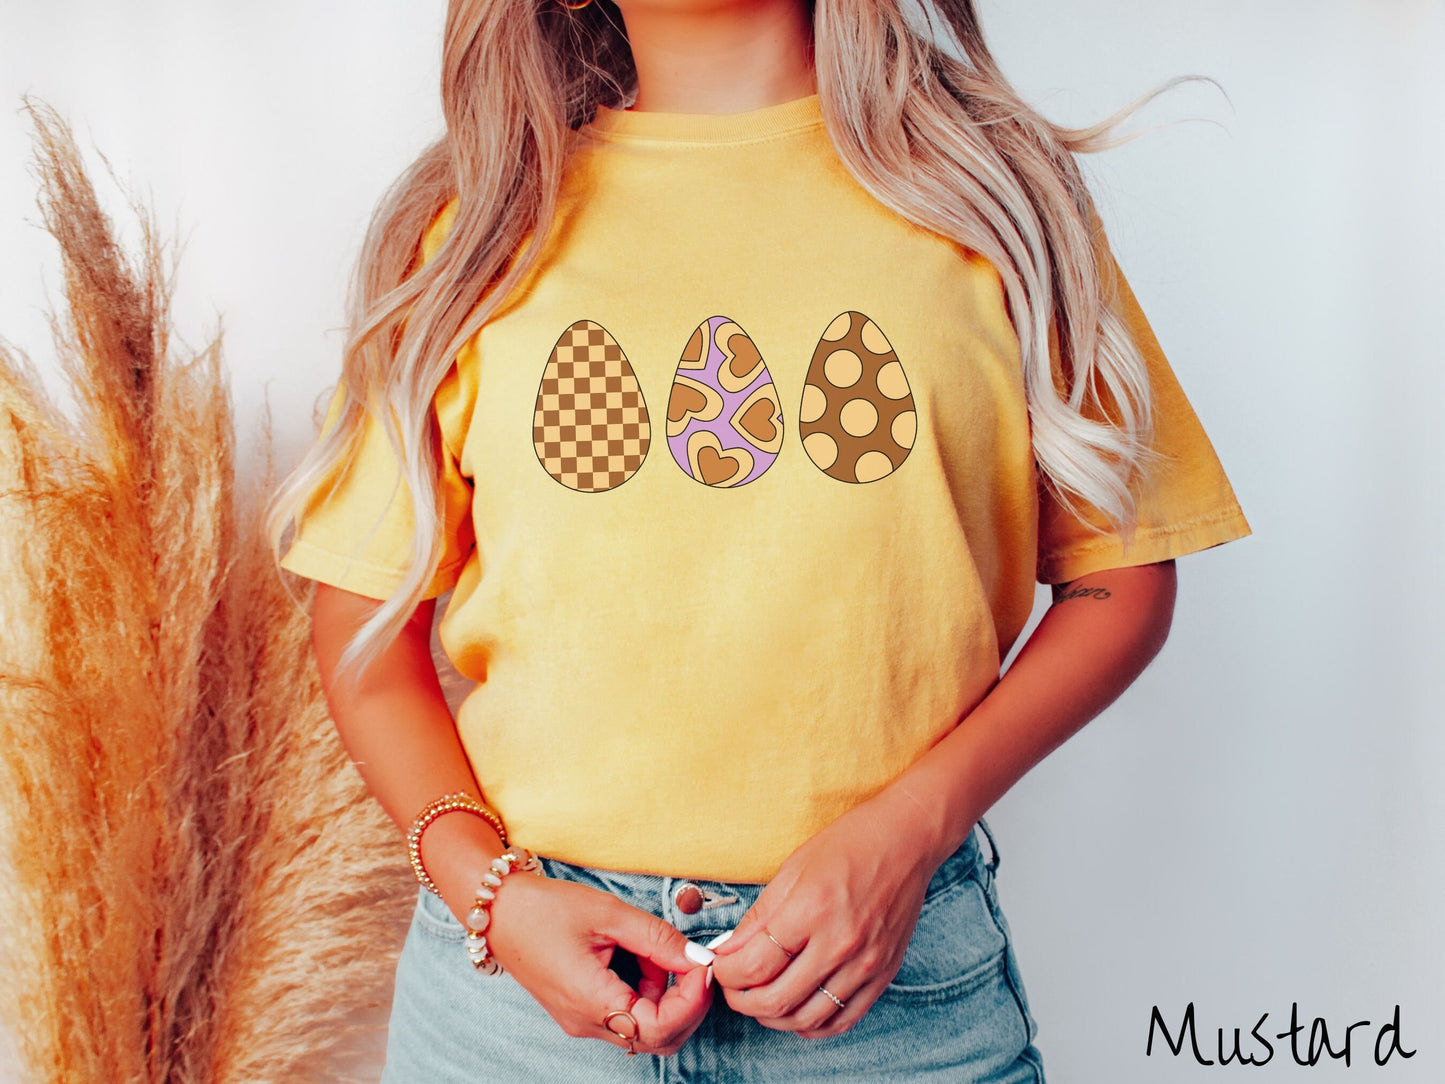 A woman wearing a cute, vintage mustard colored shirt with three Easter eggs. The left egg has a light yellow and brown checkerboard pattern, the middle is purple with light yellow brown hearts, and the right is brown with light yellow circles.